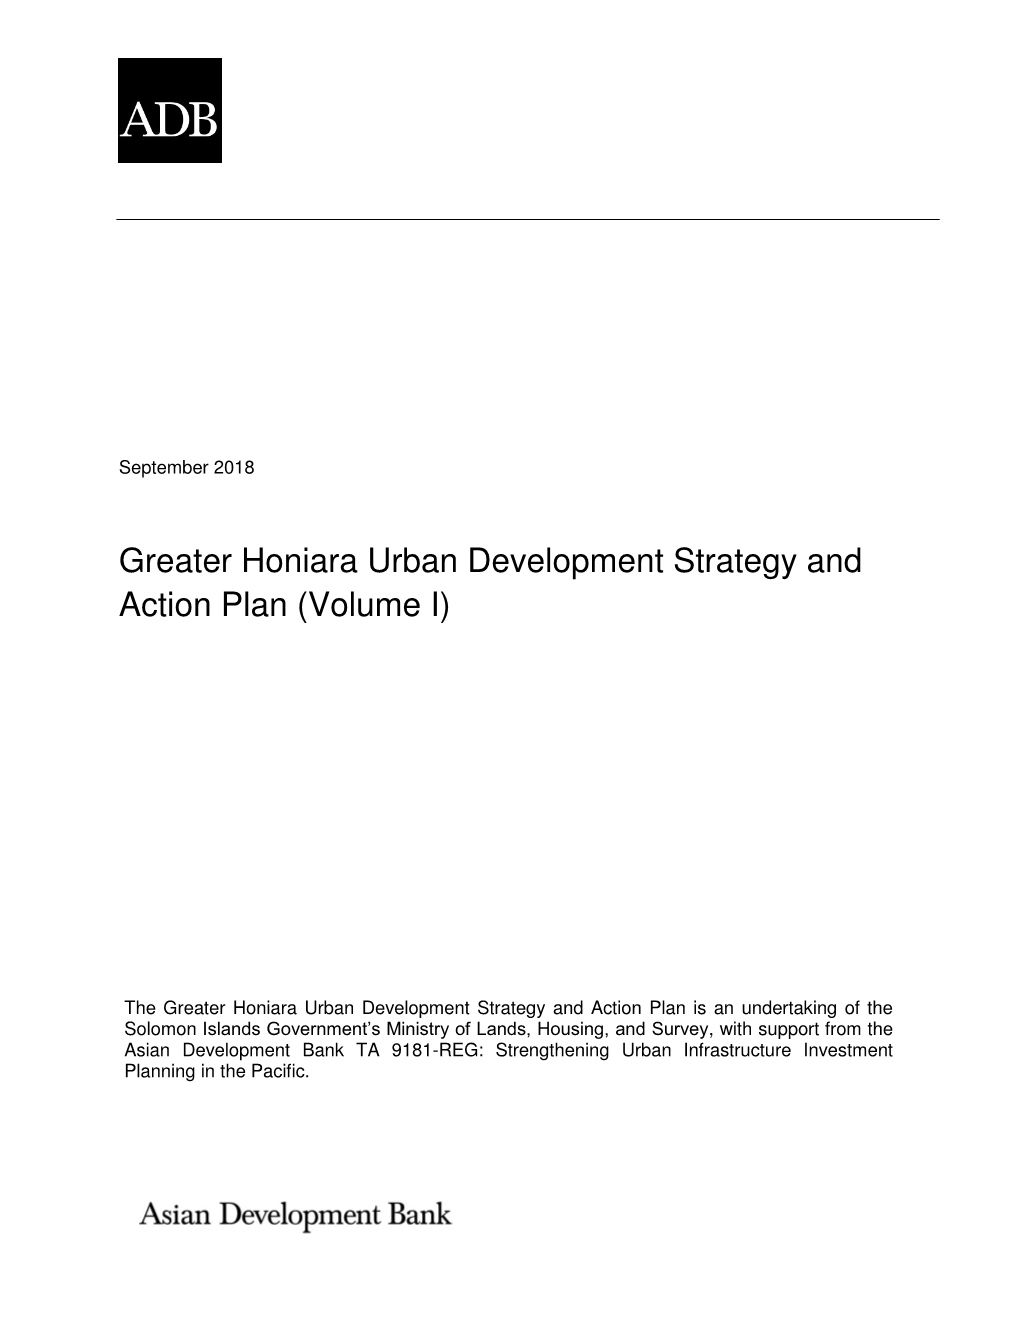 Greater Honiara Urban Development Strategy and Action Plan (Volume I)